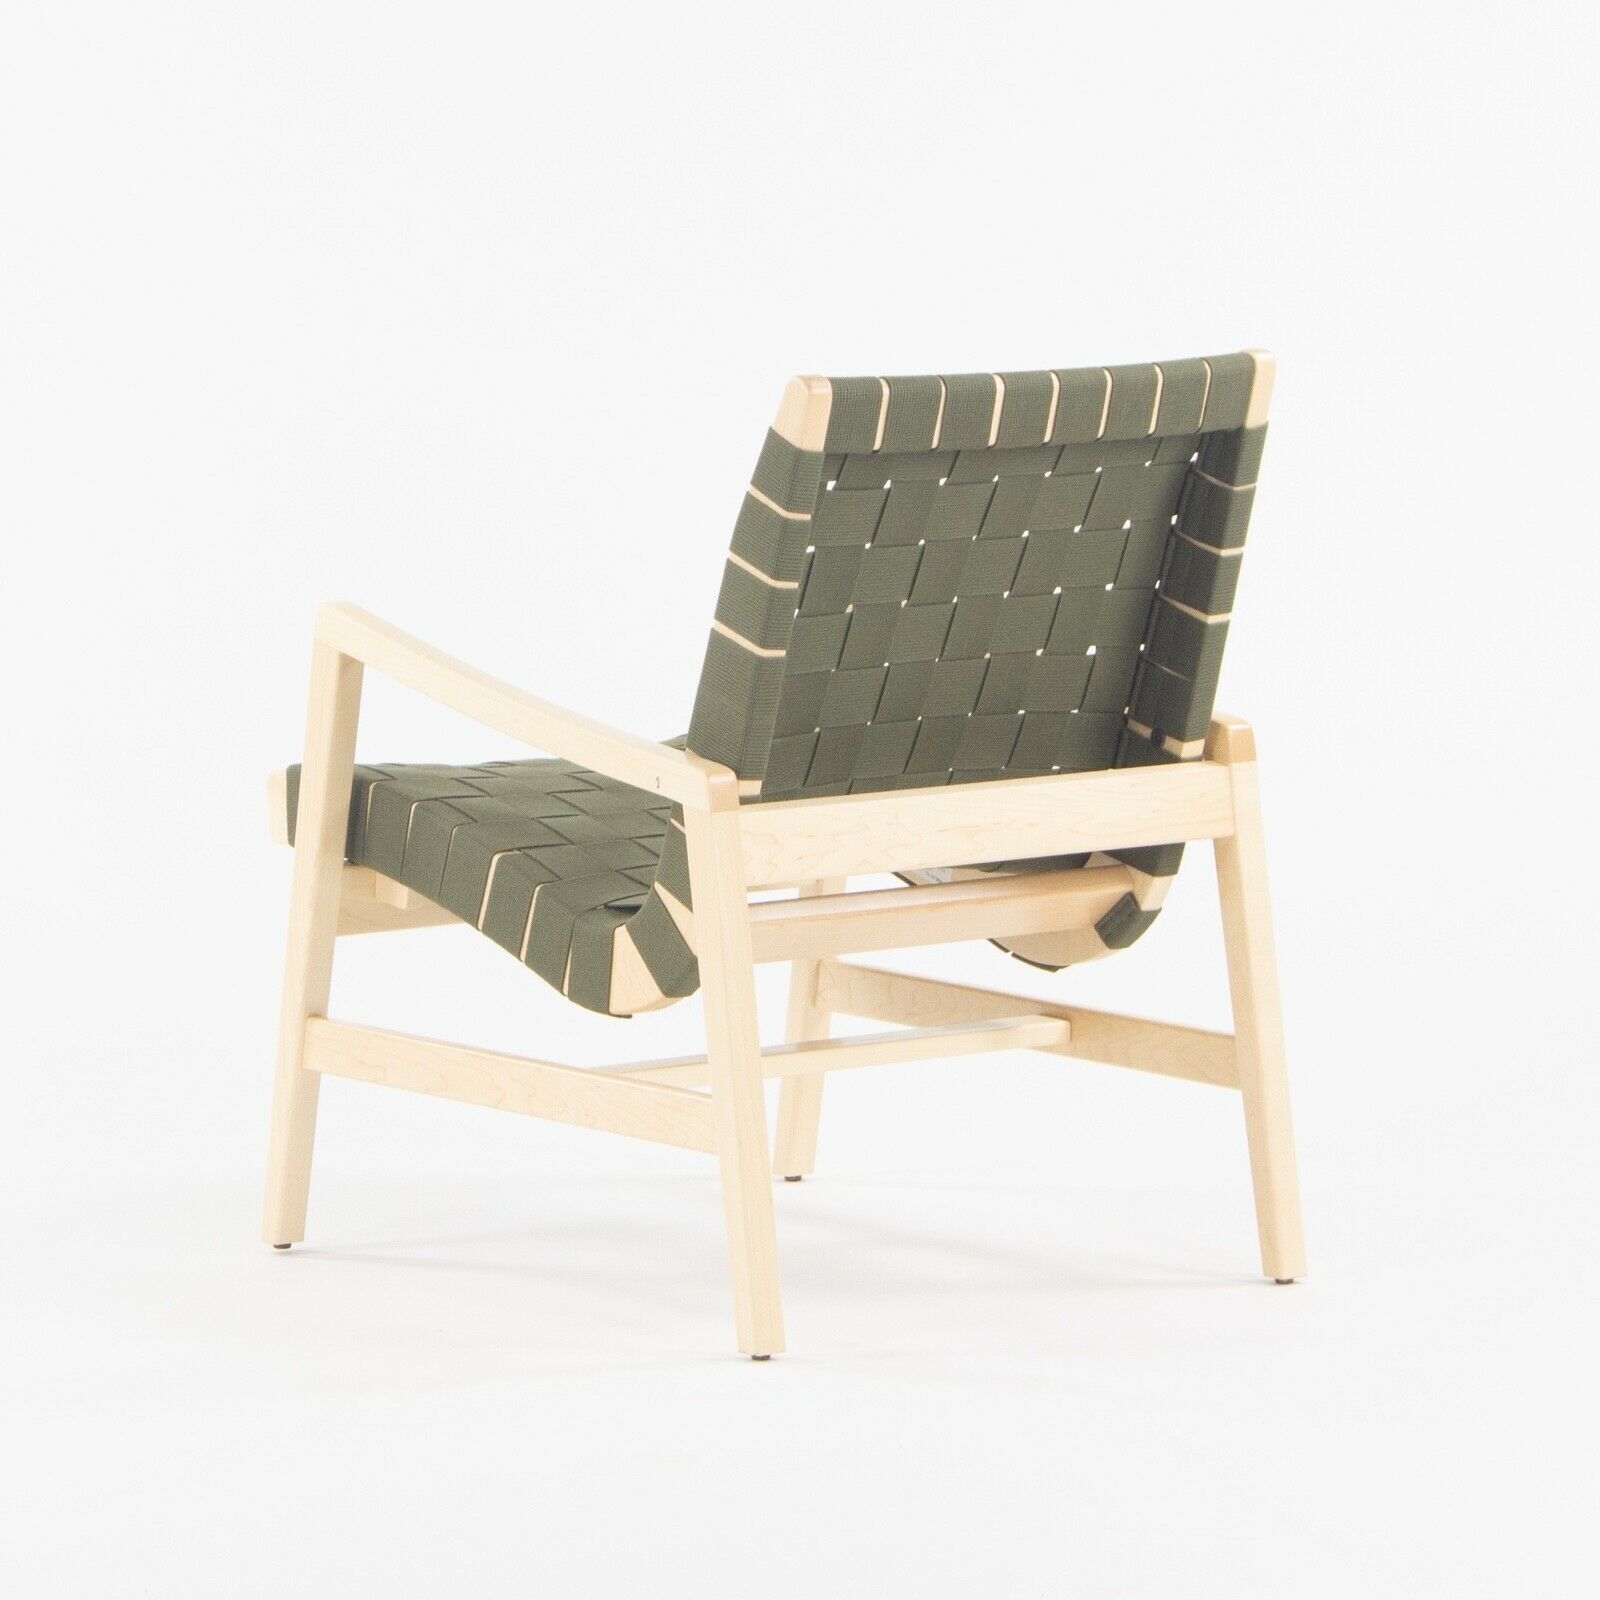 SOLD 2021 Jens Risom for Knoll Lounge Chair with Arms in Maple Frame & Khaki Webbing